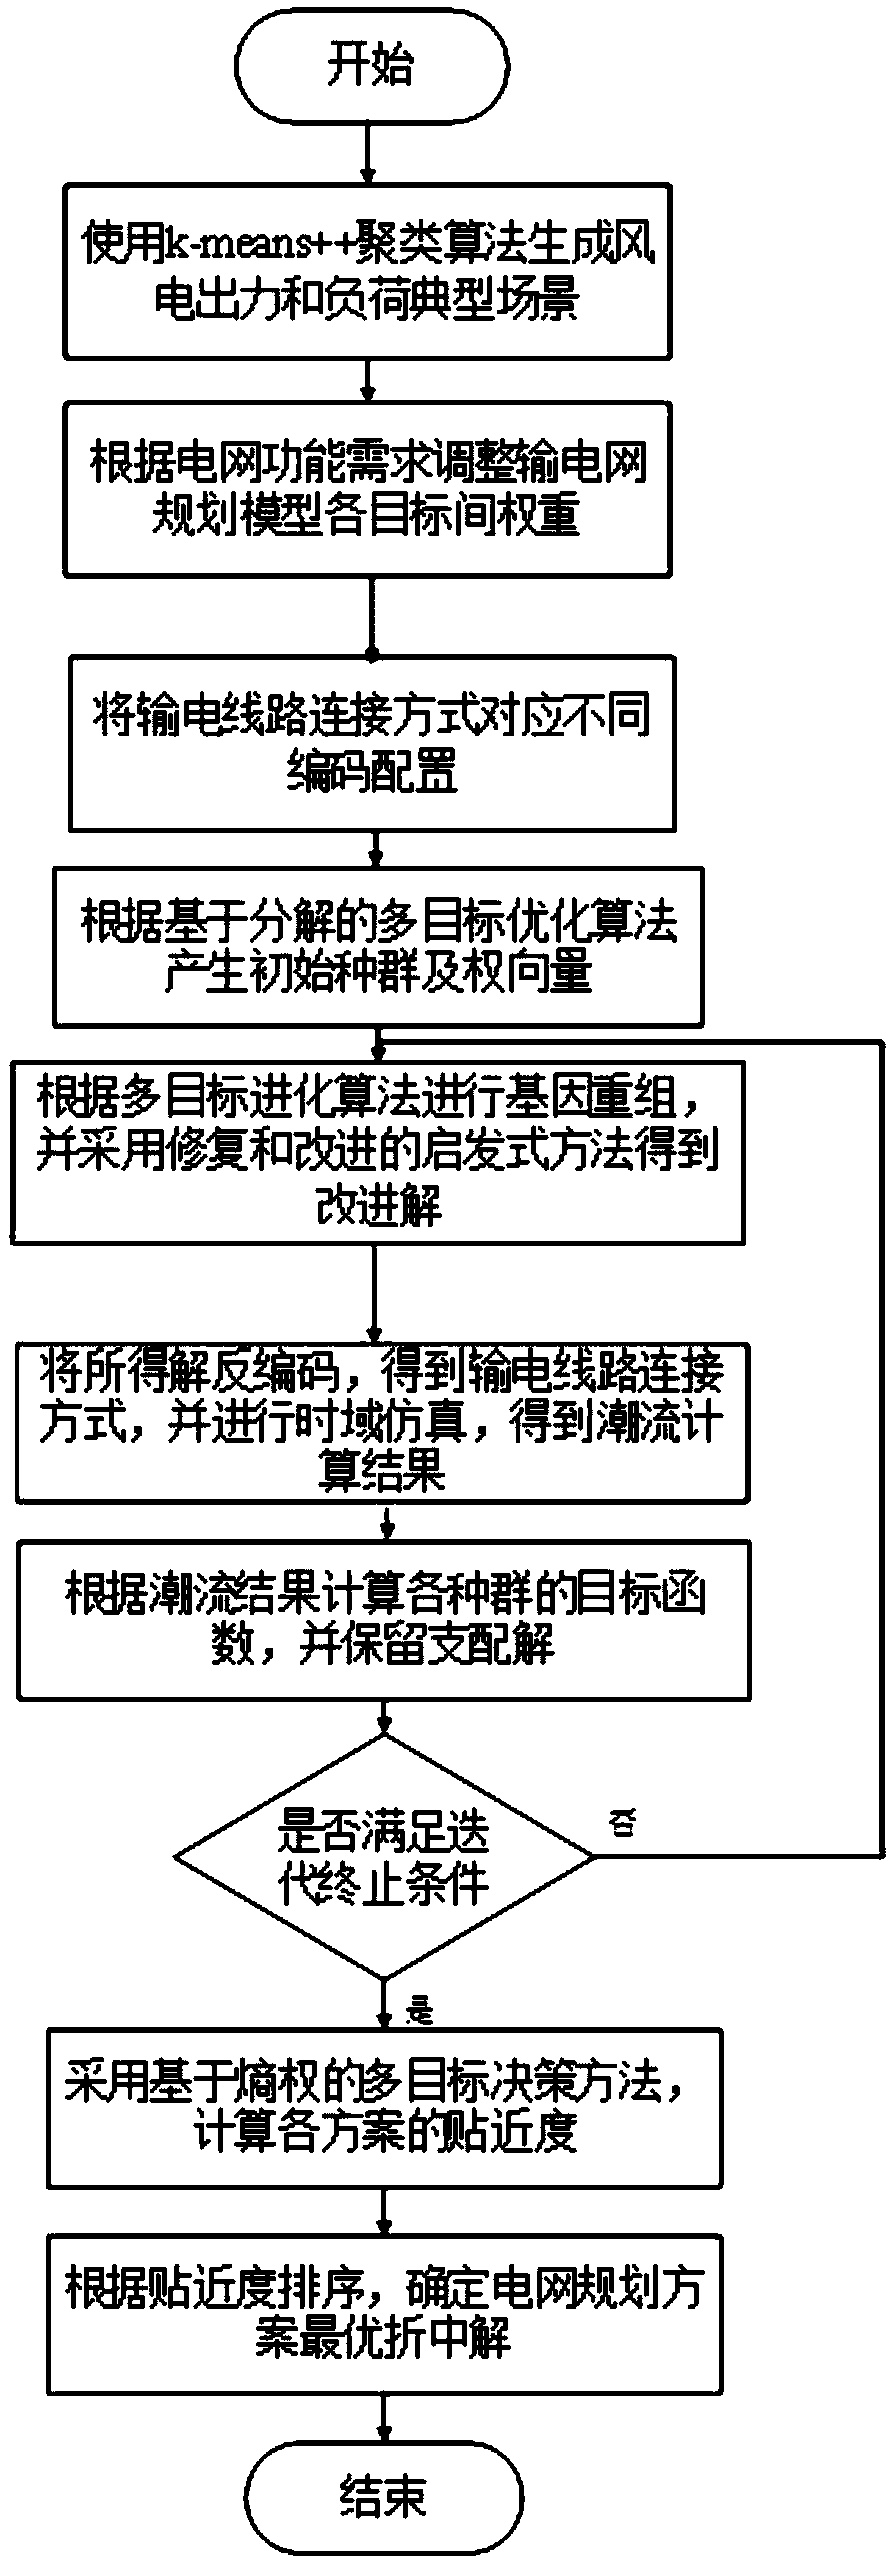 Power transmission network frame planning method considering different functional attributes